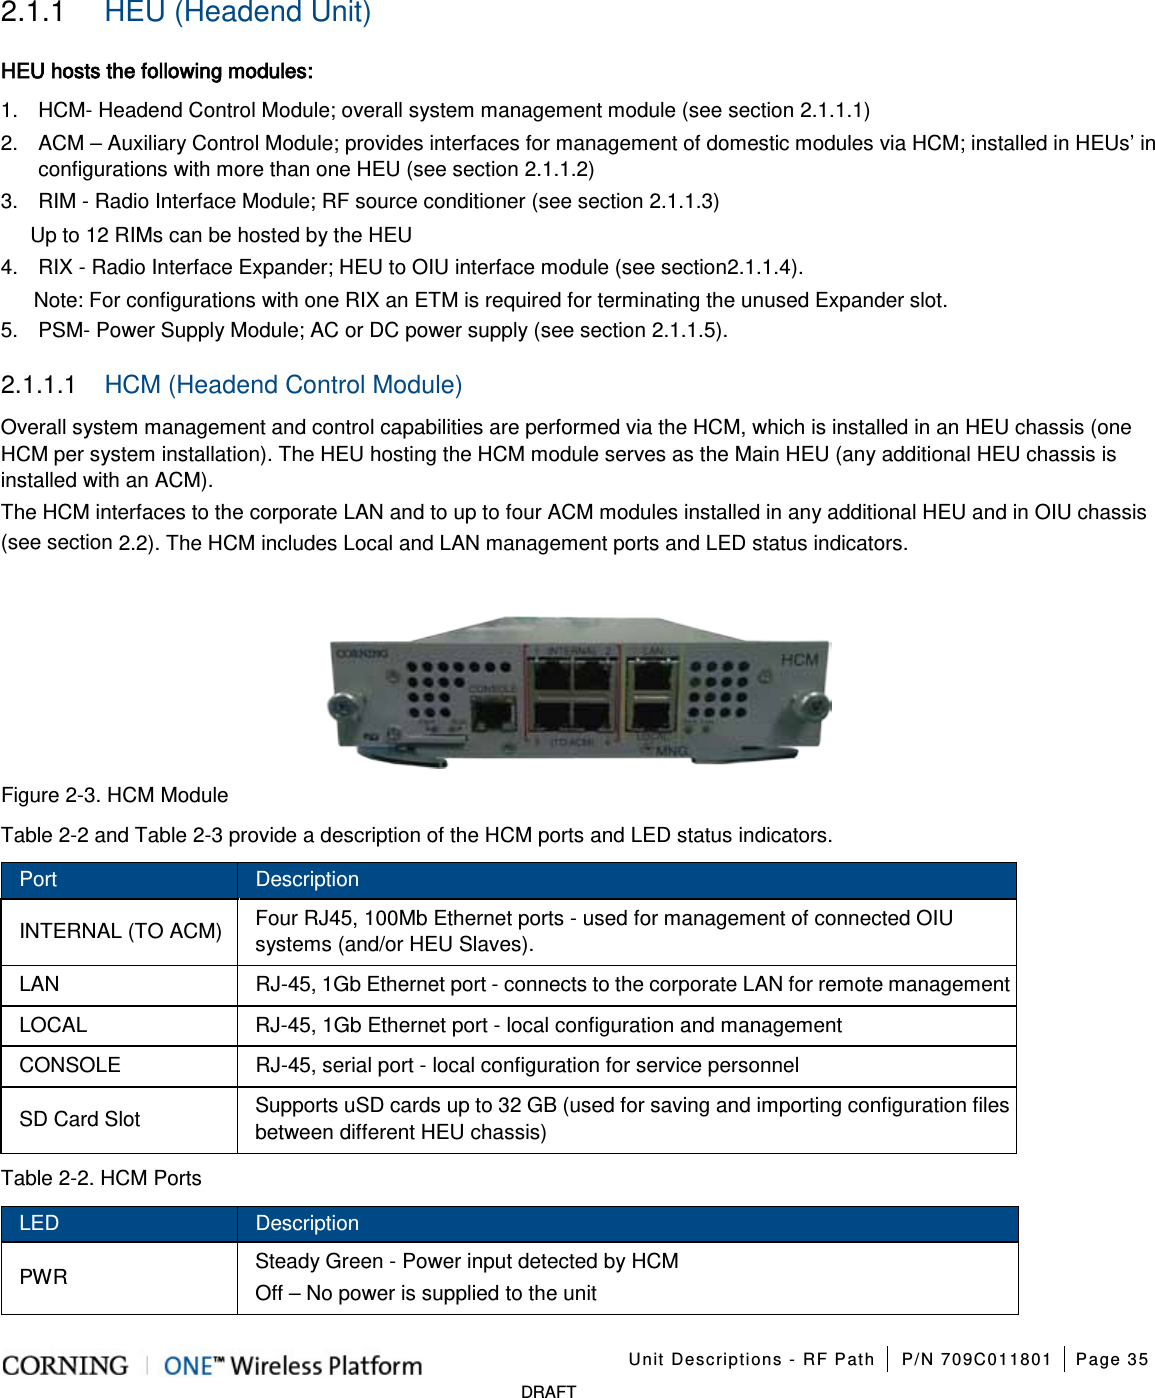    Unit Descriptions - RF Path P/N 709C011801 Page 35   DRAFT 2.1.1  HEU (Headend Unit) HEU hosts the following modules: 1.  HCM- Headend Control Module; overall system management module (see section  2.1.1.1) 2.  ACM – Auxiliary Control Module; provides interfaces for management of domestic modules via HCM; installed in HEUs’ in configurations with more than one HEU (see section  2.1.1.2) 3.  RIM - Radio Interface Module; RF source conditioner (see section  2.1.1.3) Up to 12 RIMs can be hosted by the HEU   4.  RIX - Radio Interface Expander; HEU to OIU interface module (see section 2.1.1.4). Note: For configurations with one RIX an ETM is required for terminating the unused Expander slot. 5.  PSM- Power Supply Module; AC or DC power supply (see section  2.1.1.5). 2.1.1.1  HCM (Headend Control Module) Overall system management and control capabilities are performed via the HCM, which is installed in an HEU chassis (one HCM per system installation). The HEU hosting the HCM module serves as the Main HEU (any additional HEU chassis is installed with an ACM). The HCM interfaces to the corporate LAN and to up to four ACM modules installed in any additional HEU and in OIU chassis (see section  2.2). The HCM includes Local and LAN management ports and LED status indicators.        Figure  2-3. HCM Module Table  2-2 and Table  2-3 provide a description of the HCM ports and LED status indicators. Port Description INTERNAL (TO ACM) Four RJ45, 100Mb Ethernet ports - used for management of connected OIU systems (and/or HEU Slaves). LAN RJ-45, 1Gb Ethernet port - connects to the corporate LAN for remote management LOCAL RJ-45, 1Gb Ethernet port - local configuration and management CONSOLE RJ-45, serial port - local configuration for service personnel SD Card Slot Supports uSD cards up to 32 GB (used for saving and importing configuration files between different HEU chassis) Table  2-2. HCM Ports LED Description PWR Steady Green - Power input detected by HCM Off – No power is supplied to the unit 